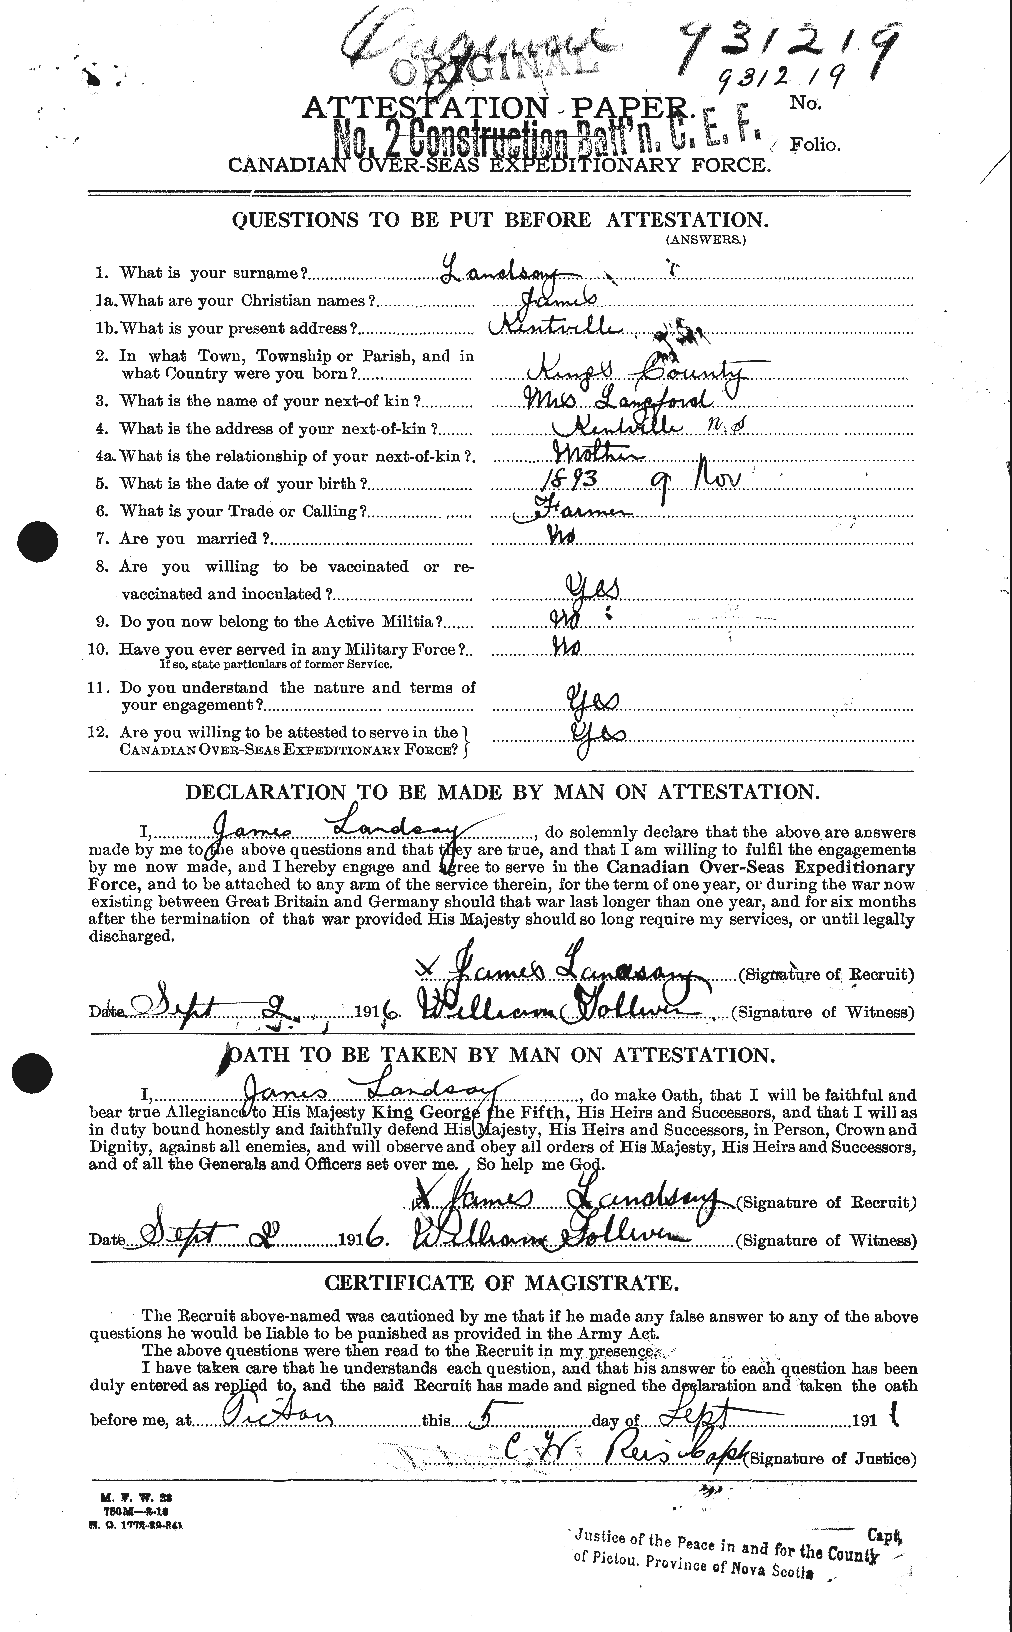 Personnel Records of the First World War - CEF 447435a